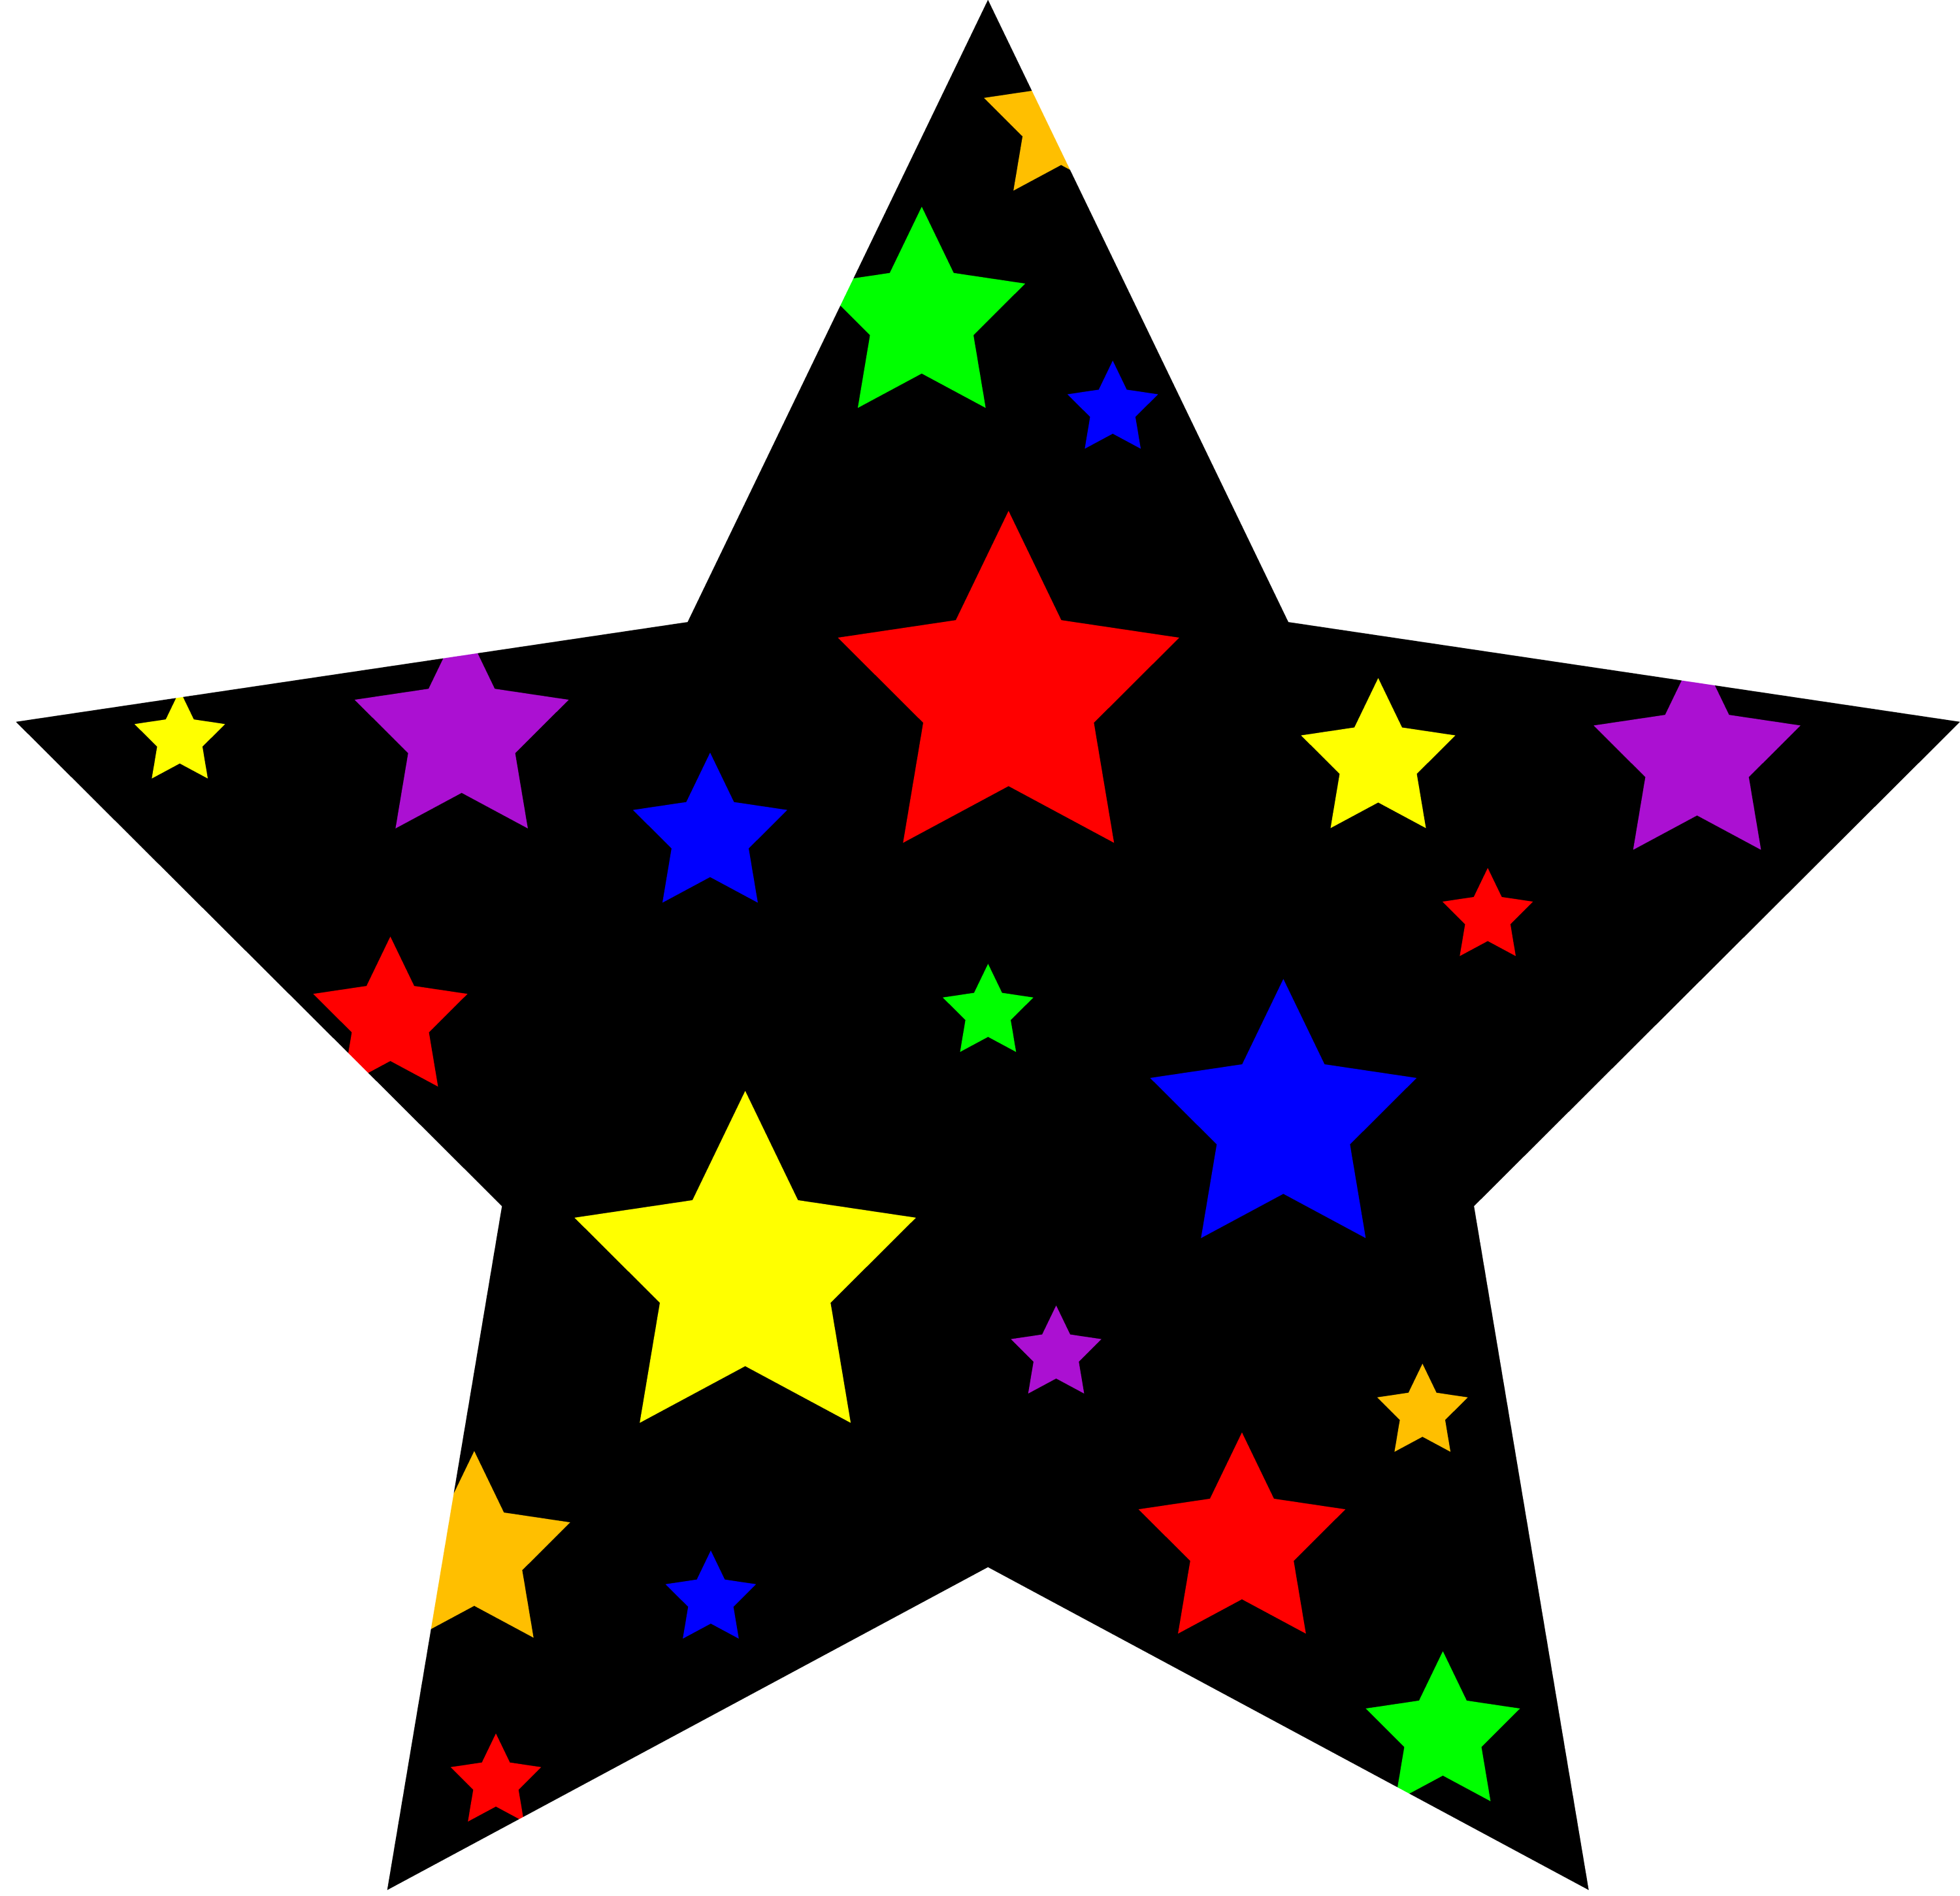 Colorful Starry Star Symbol Free Clip Art